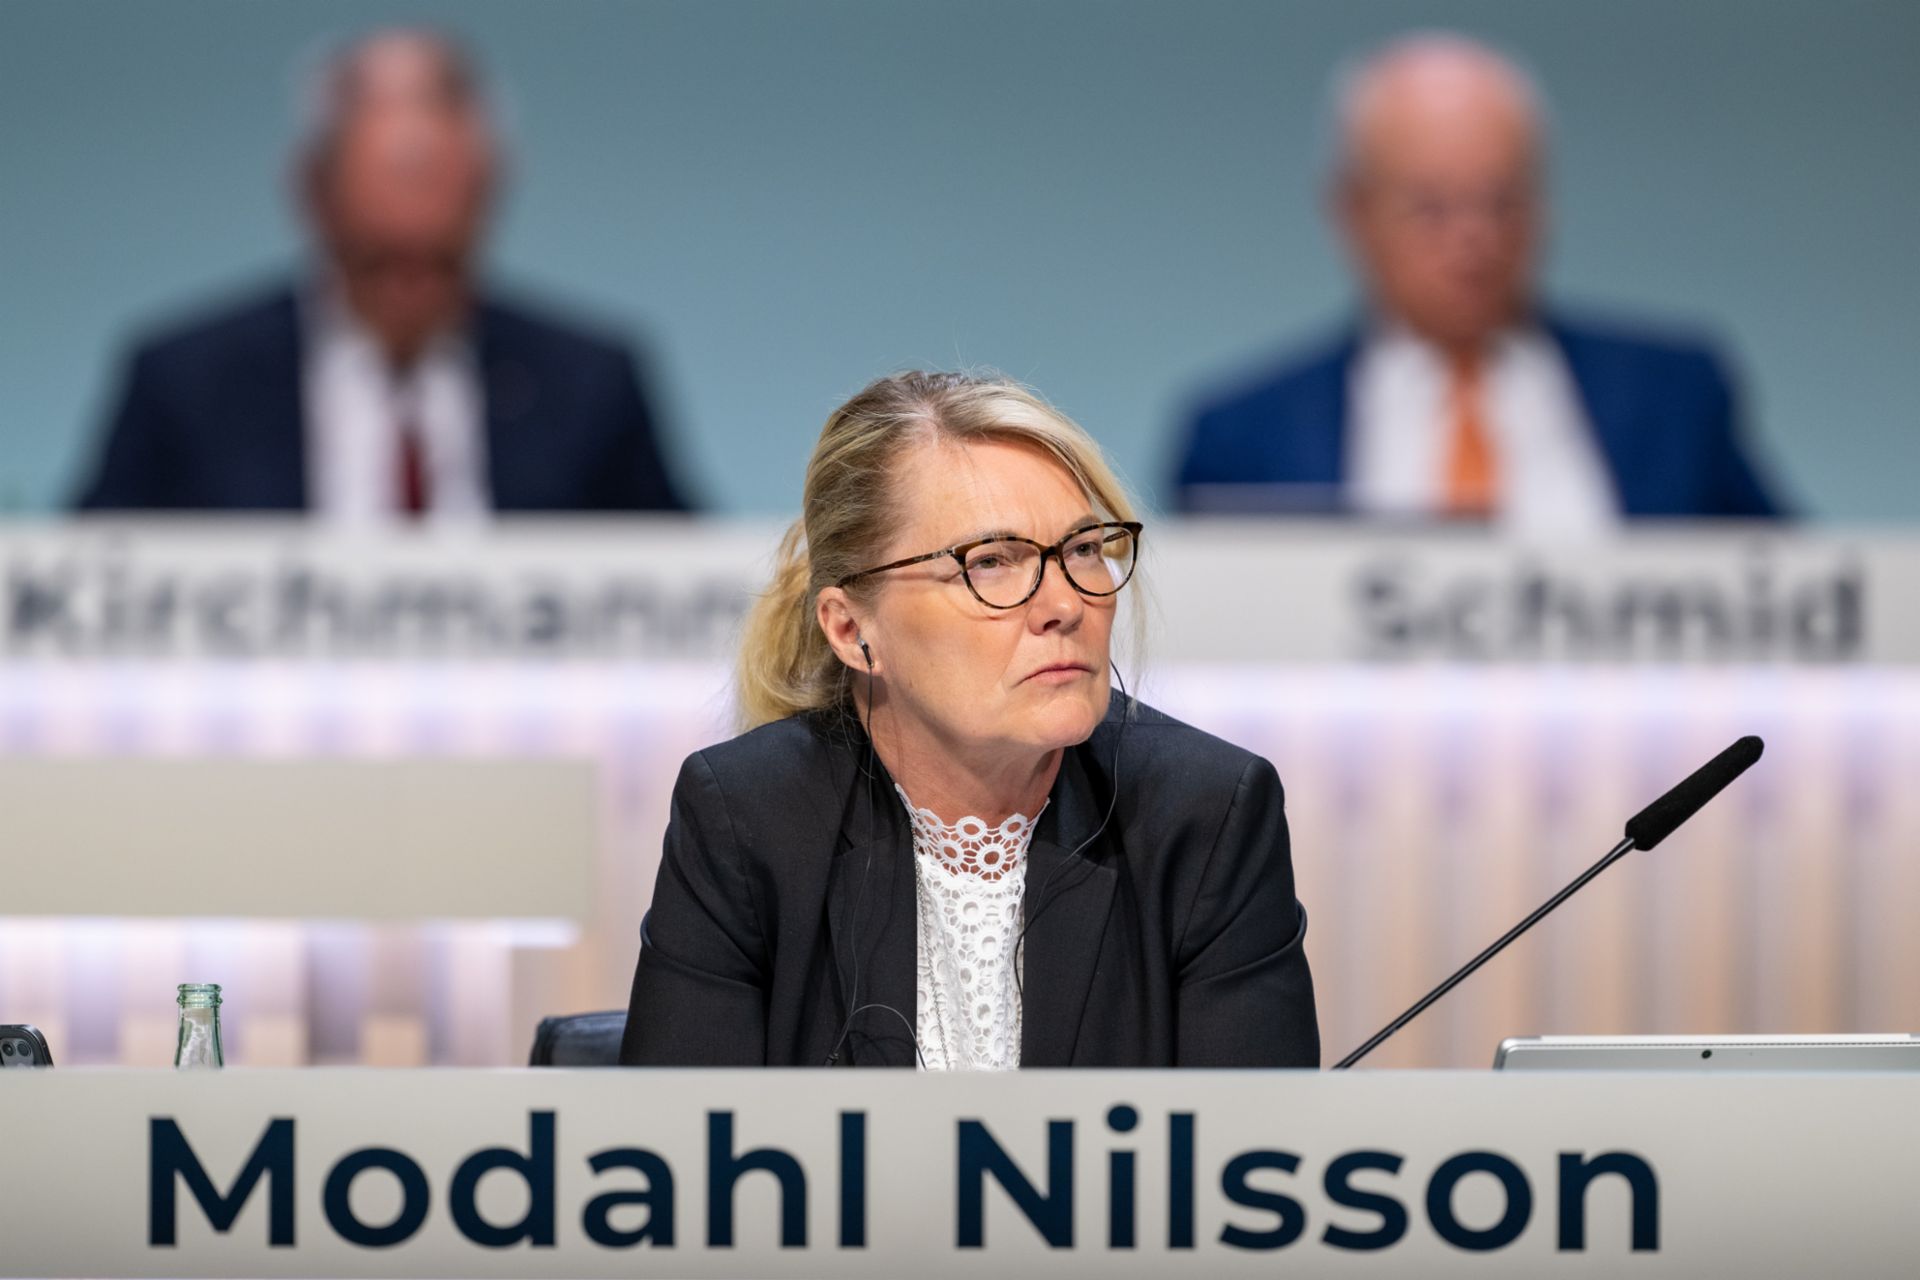 As a new board member, Catharina Modahl Nilsson, responsible for product management in the TRATON GROUP, is also attending TRATON's Annual General Meeting 2023 for the first time.
                 